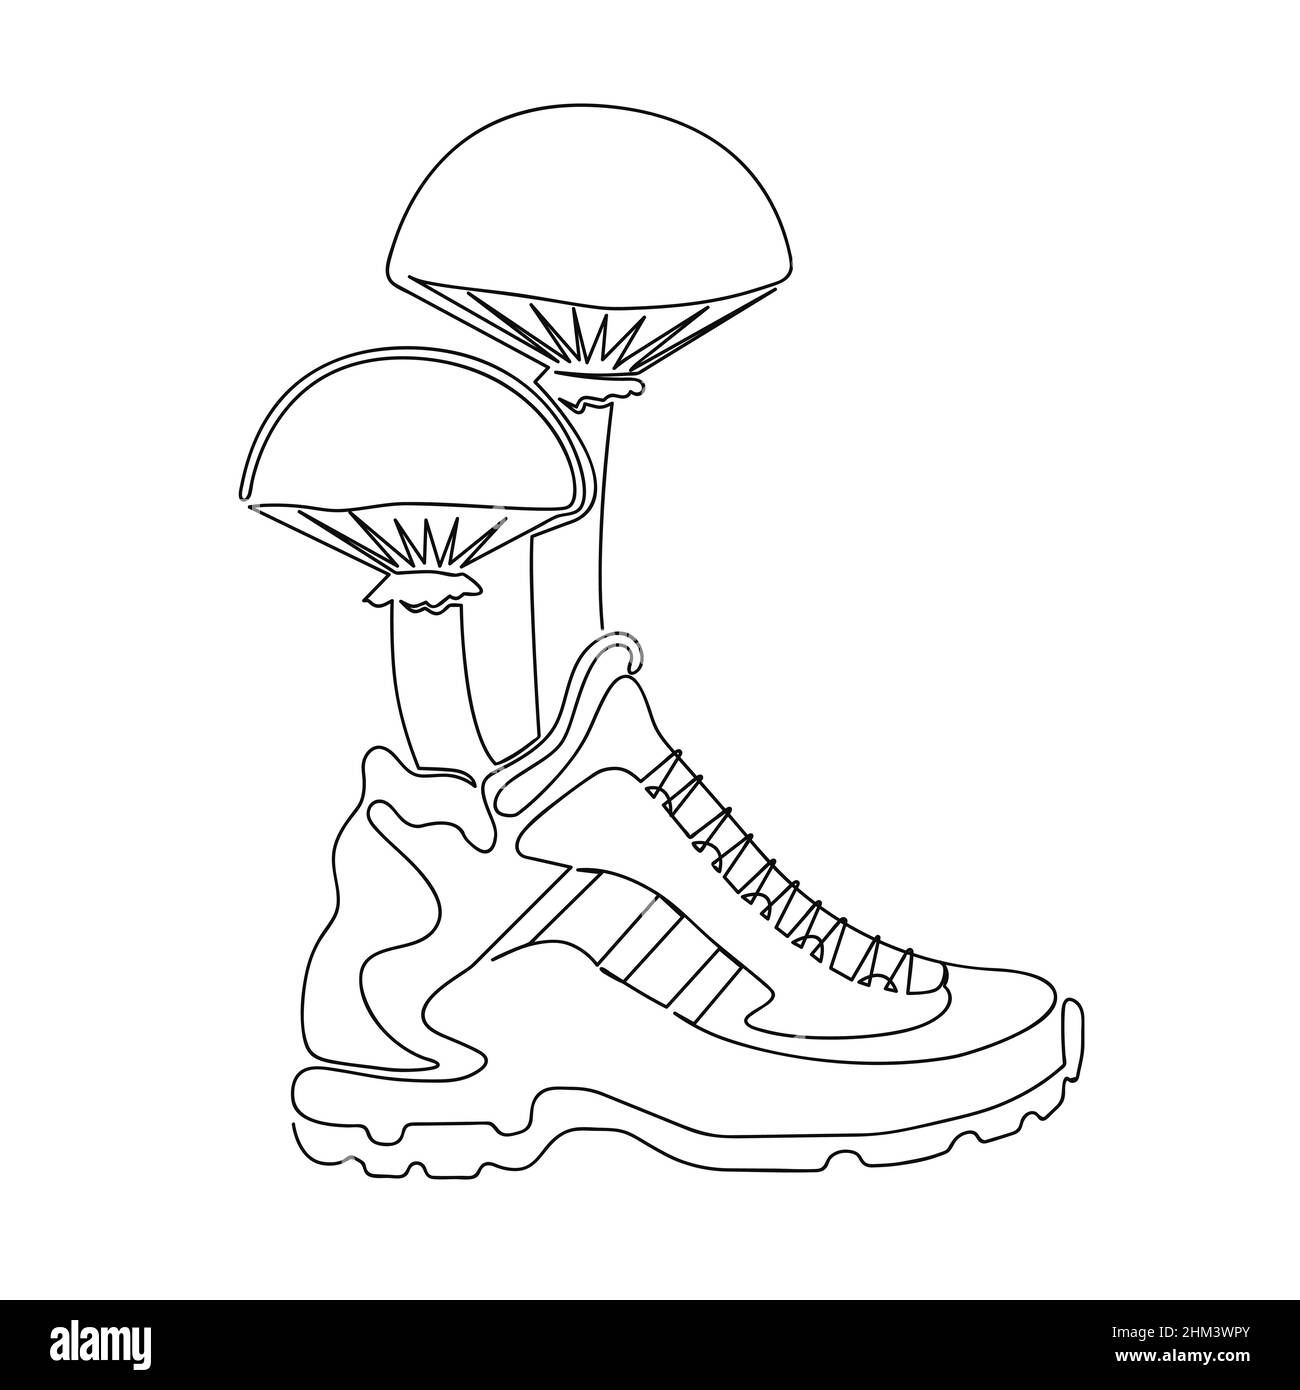 Mushrooms grow out of running shoes. Drawn with one continuous line. Stock vector illustration Stock Vector